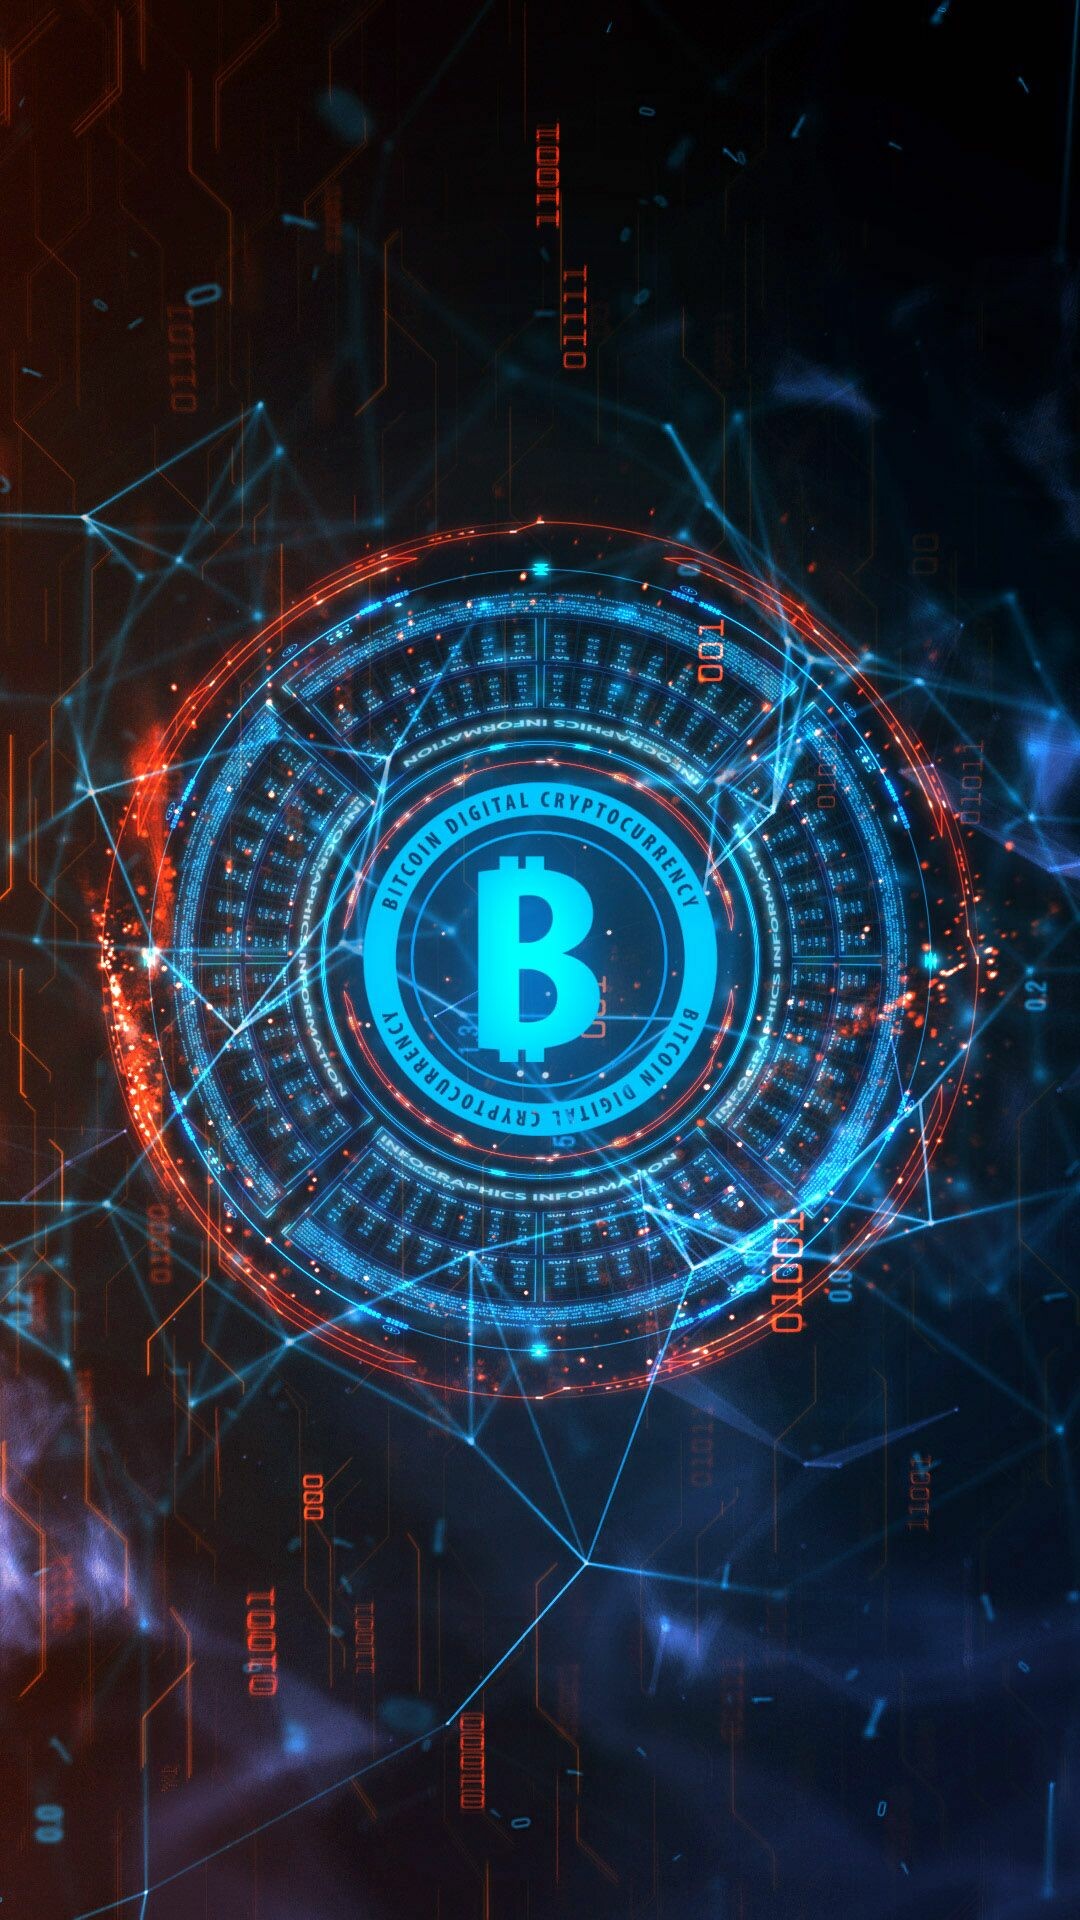 Bitcoin: BTC, One of the first cryptocurrencies to rise to popularity. 1080x1920 Full HD Wallpaper.